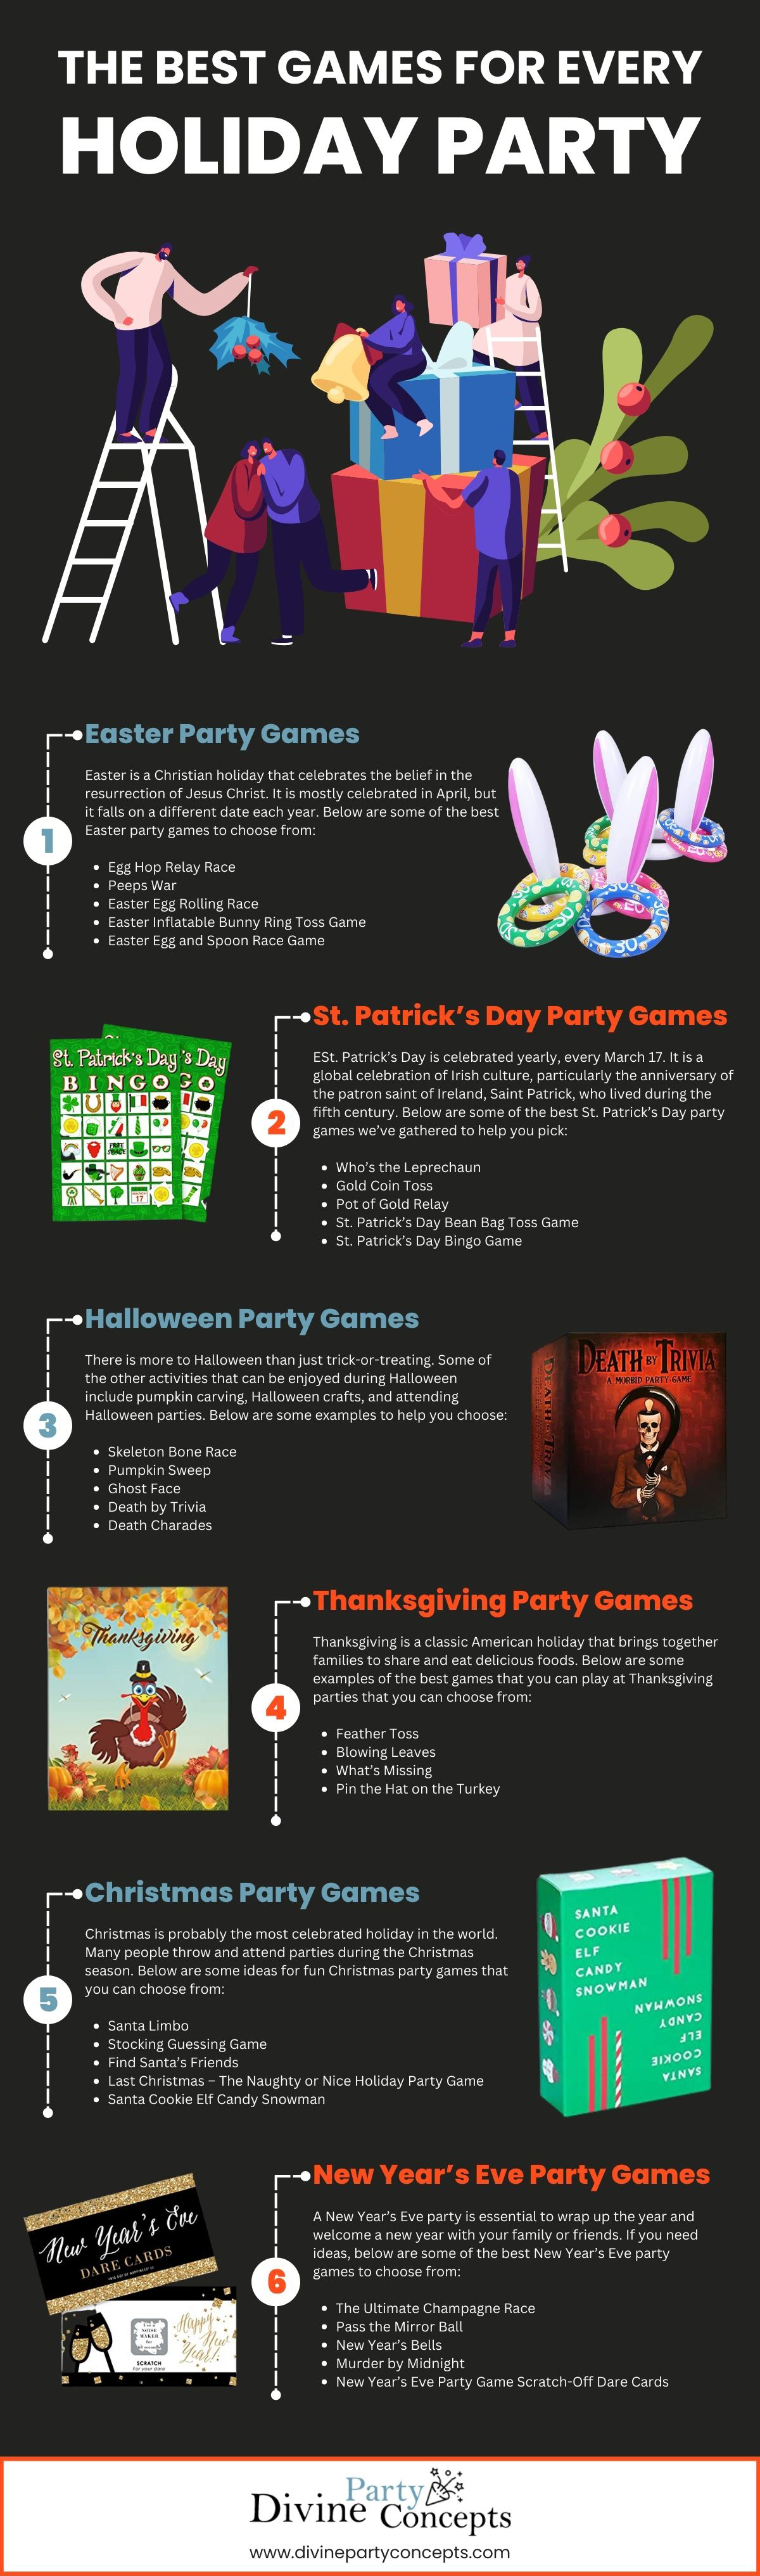 The Best Games for Every Holiday Party